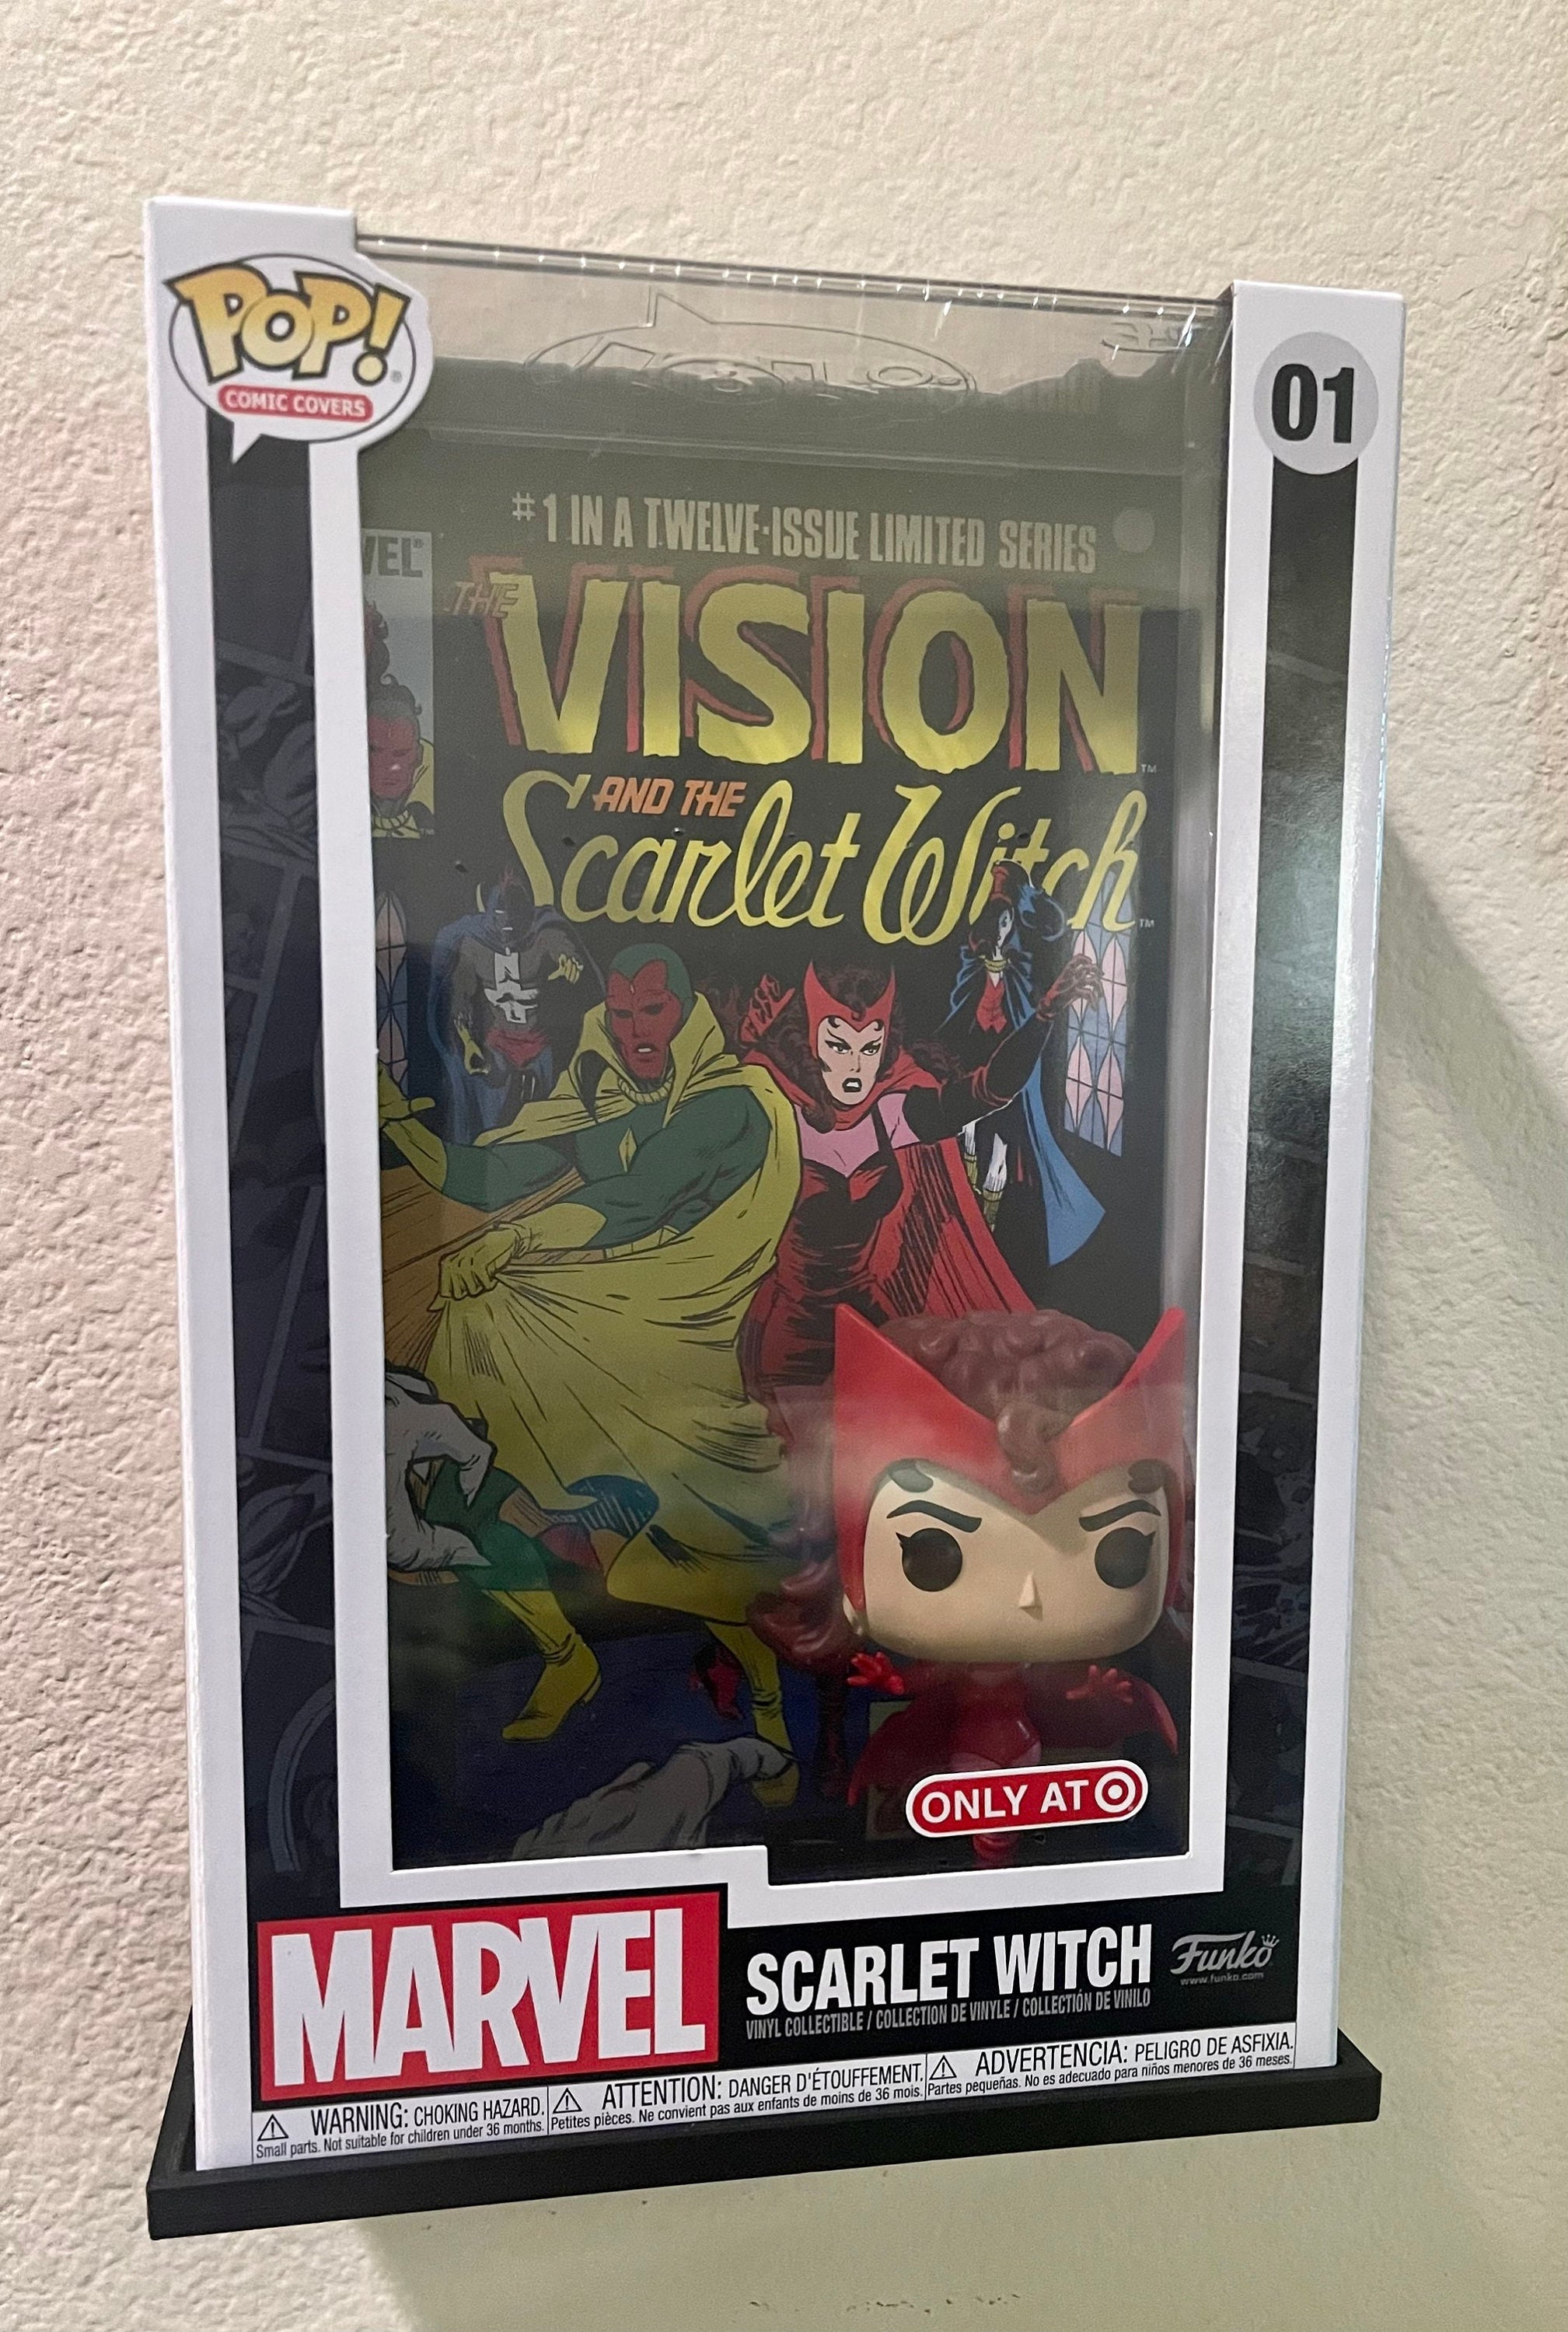 Vision 02 Comic Covers (Special Edition – Avengers Marvel) Funko Pop! Costa  Rica – Pop House Costa Rica